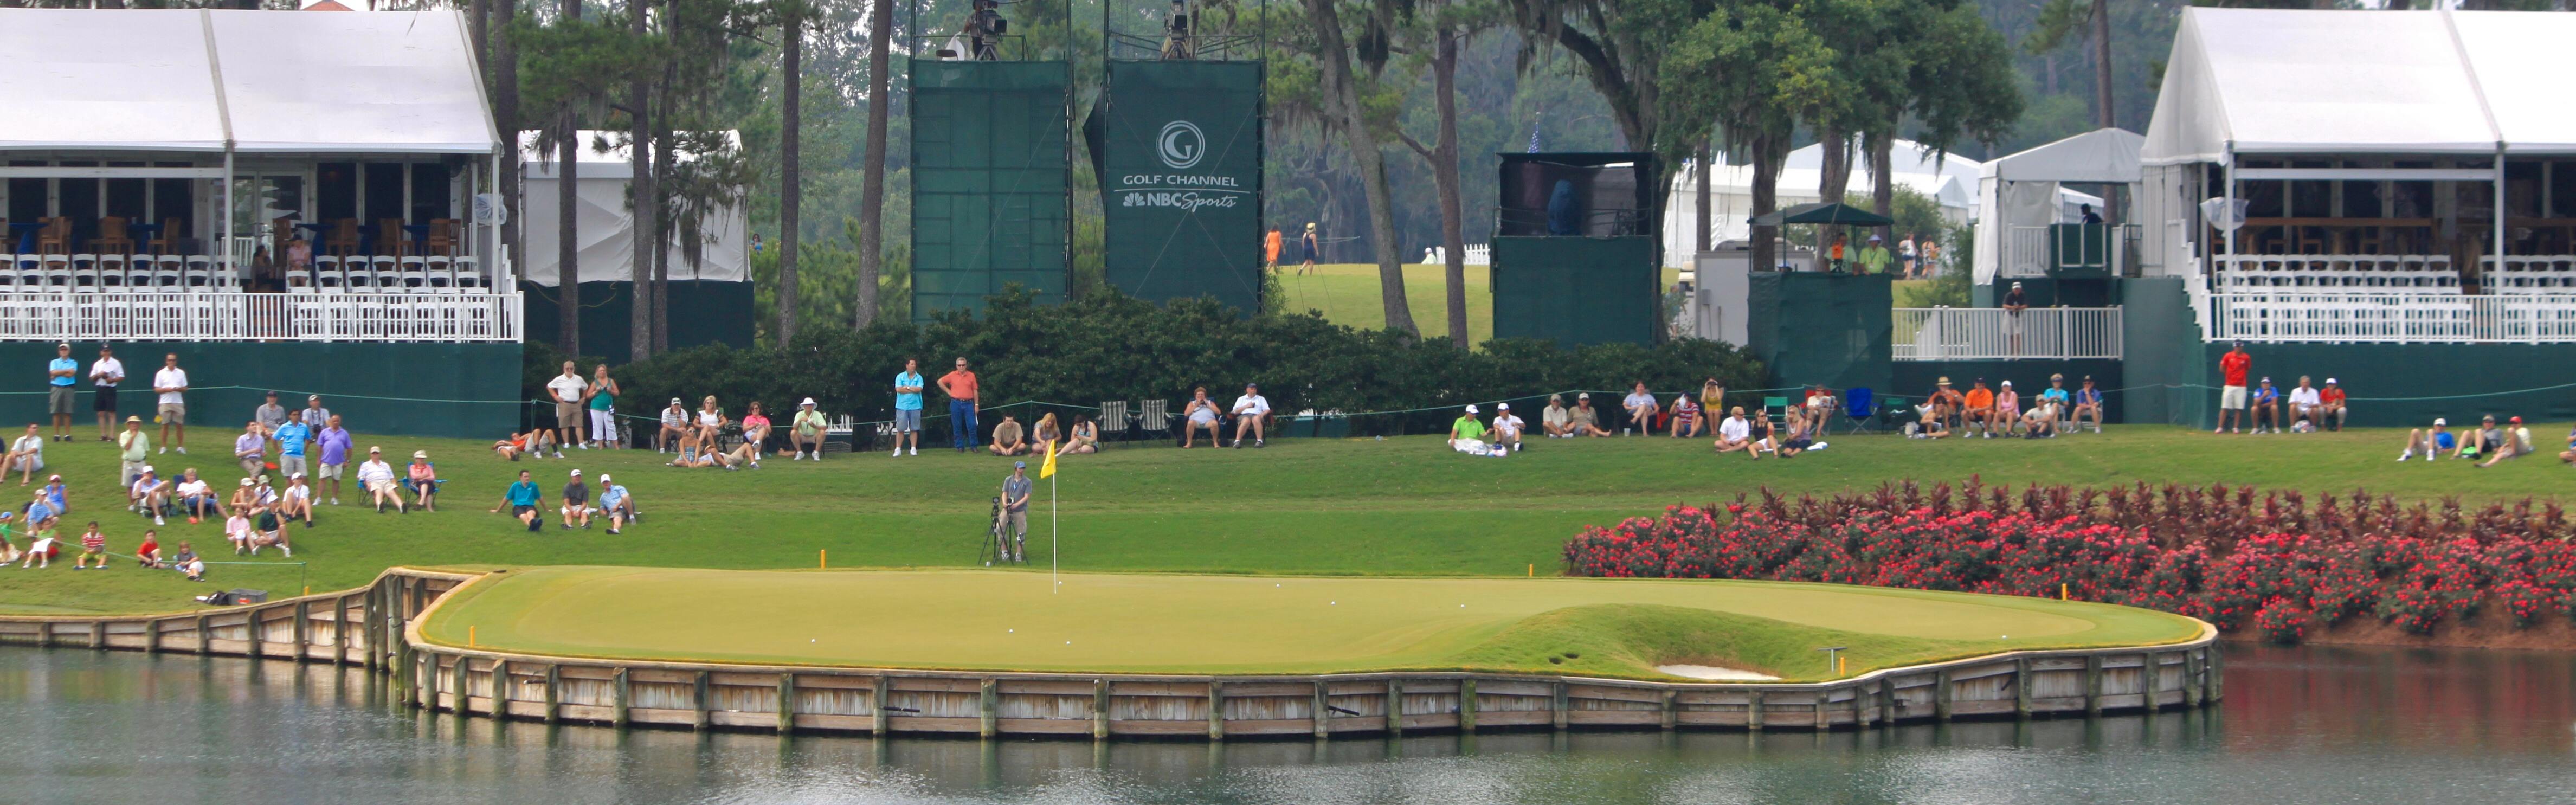 Photo taken at the 2011 PLAYERS Championship during the practice round at TPC Sawgrass. Photo by Erik, courtesy of Flickr.